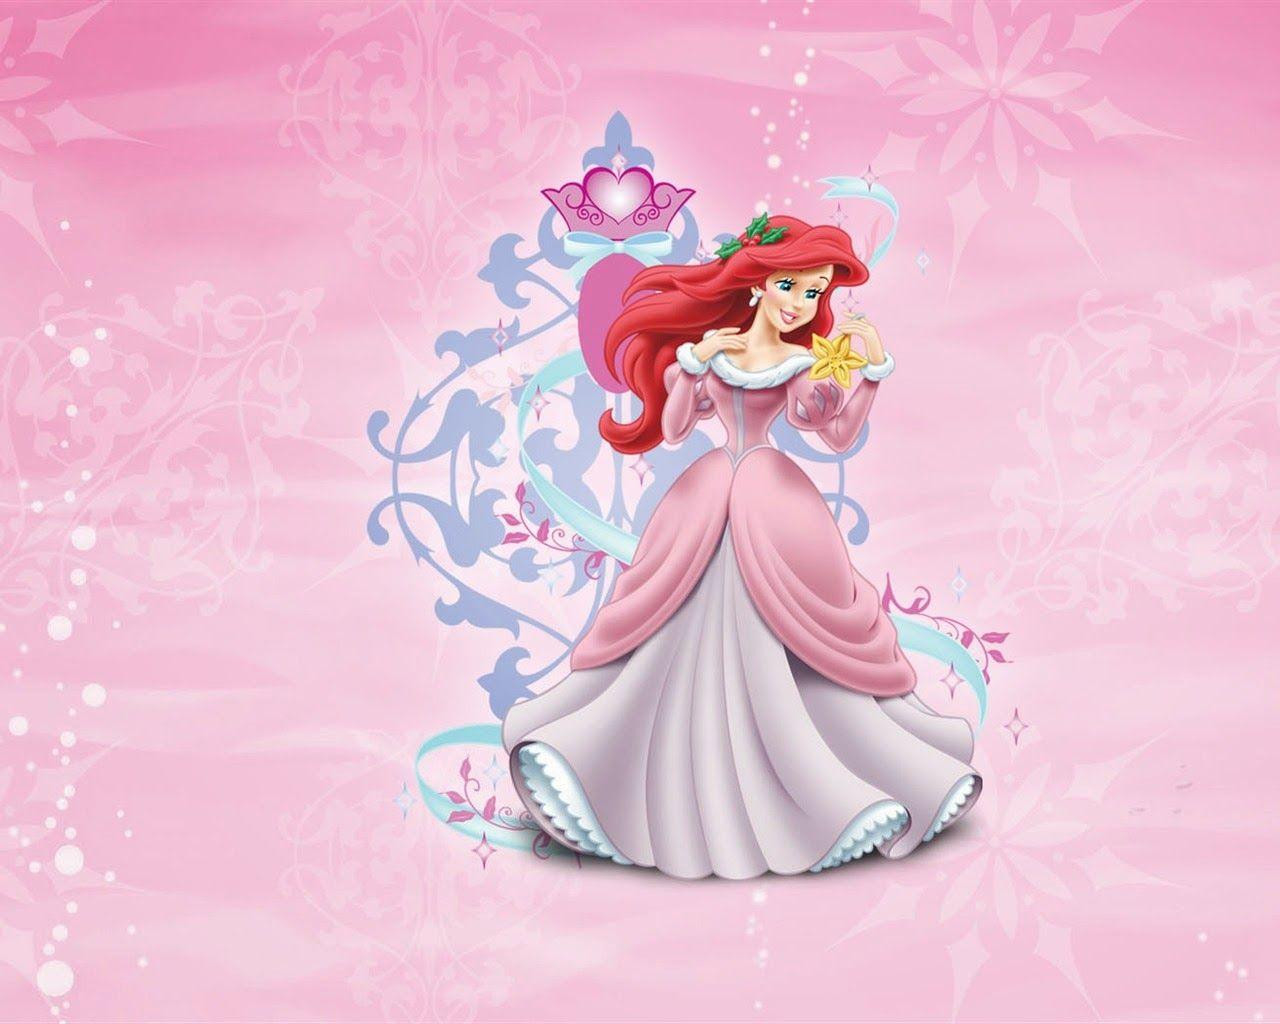 Cartoon Princess Free PPT Background for your PowerPoint